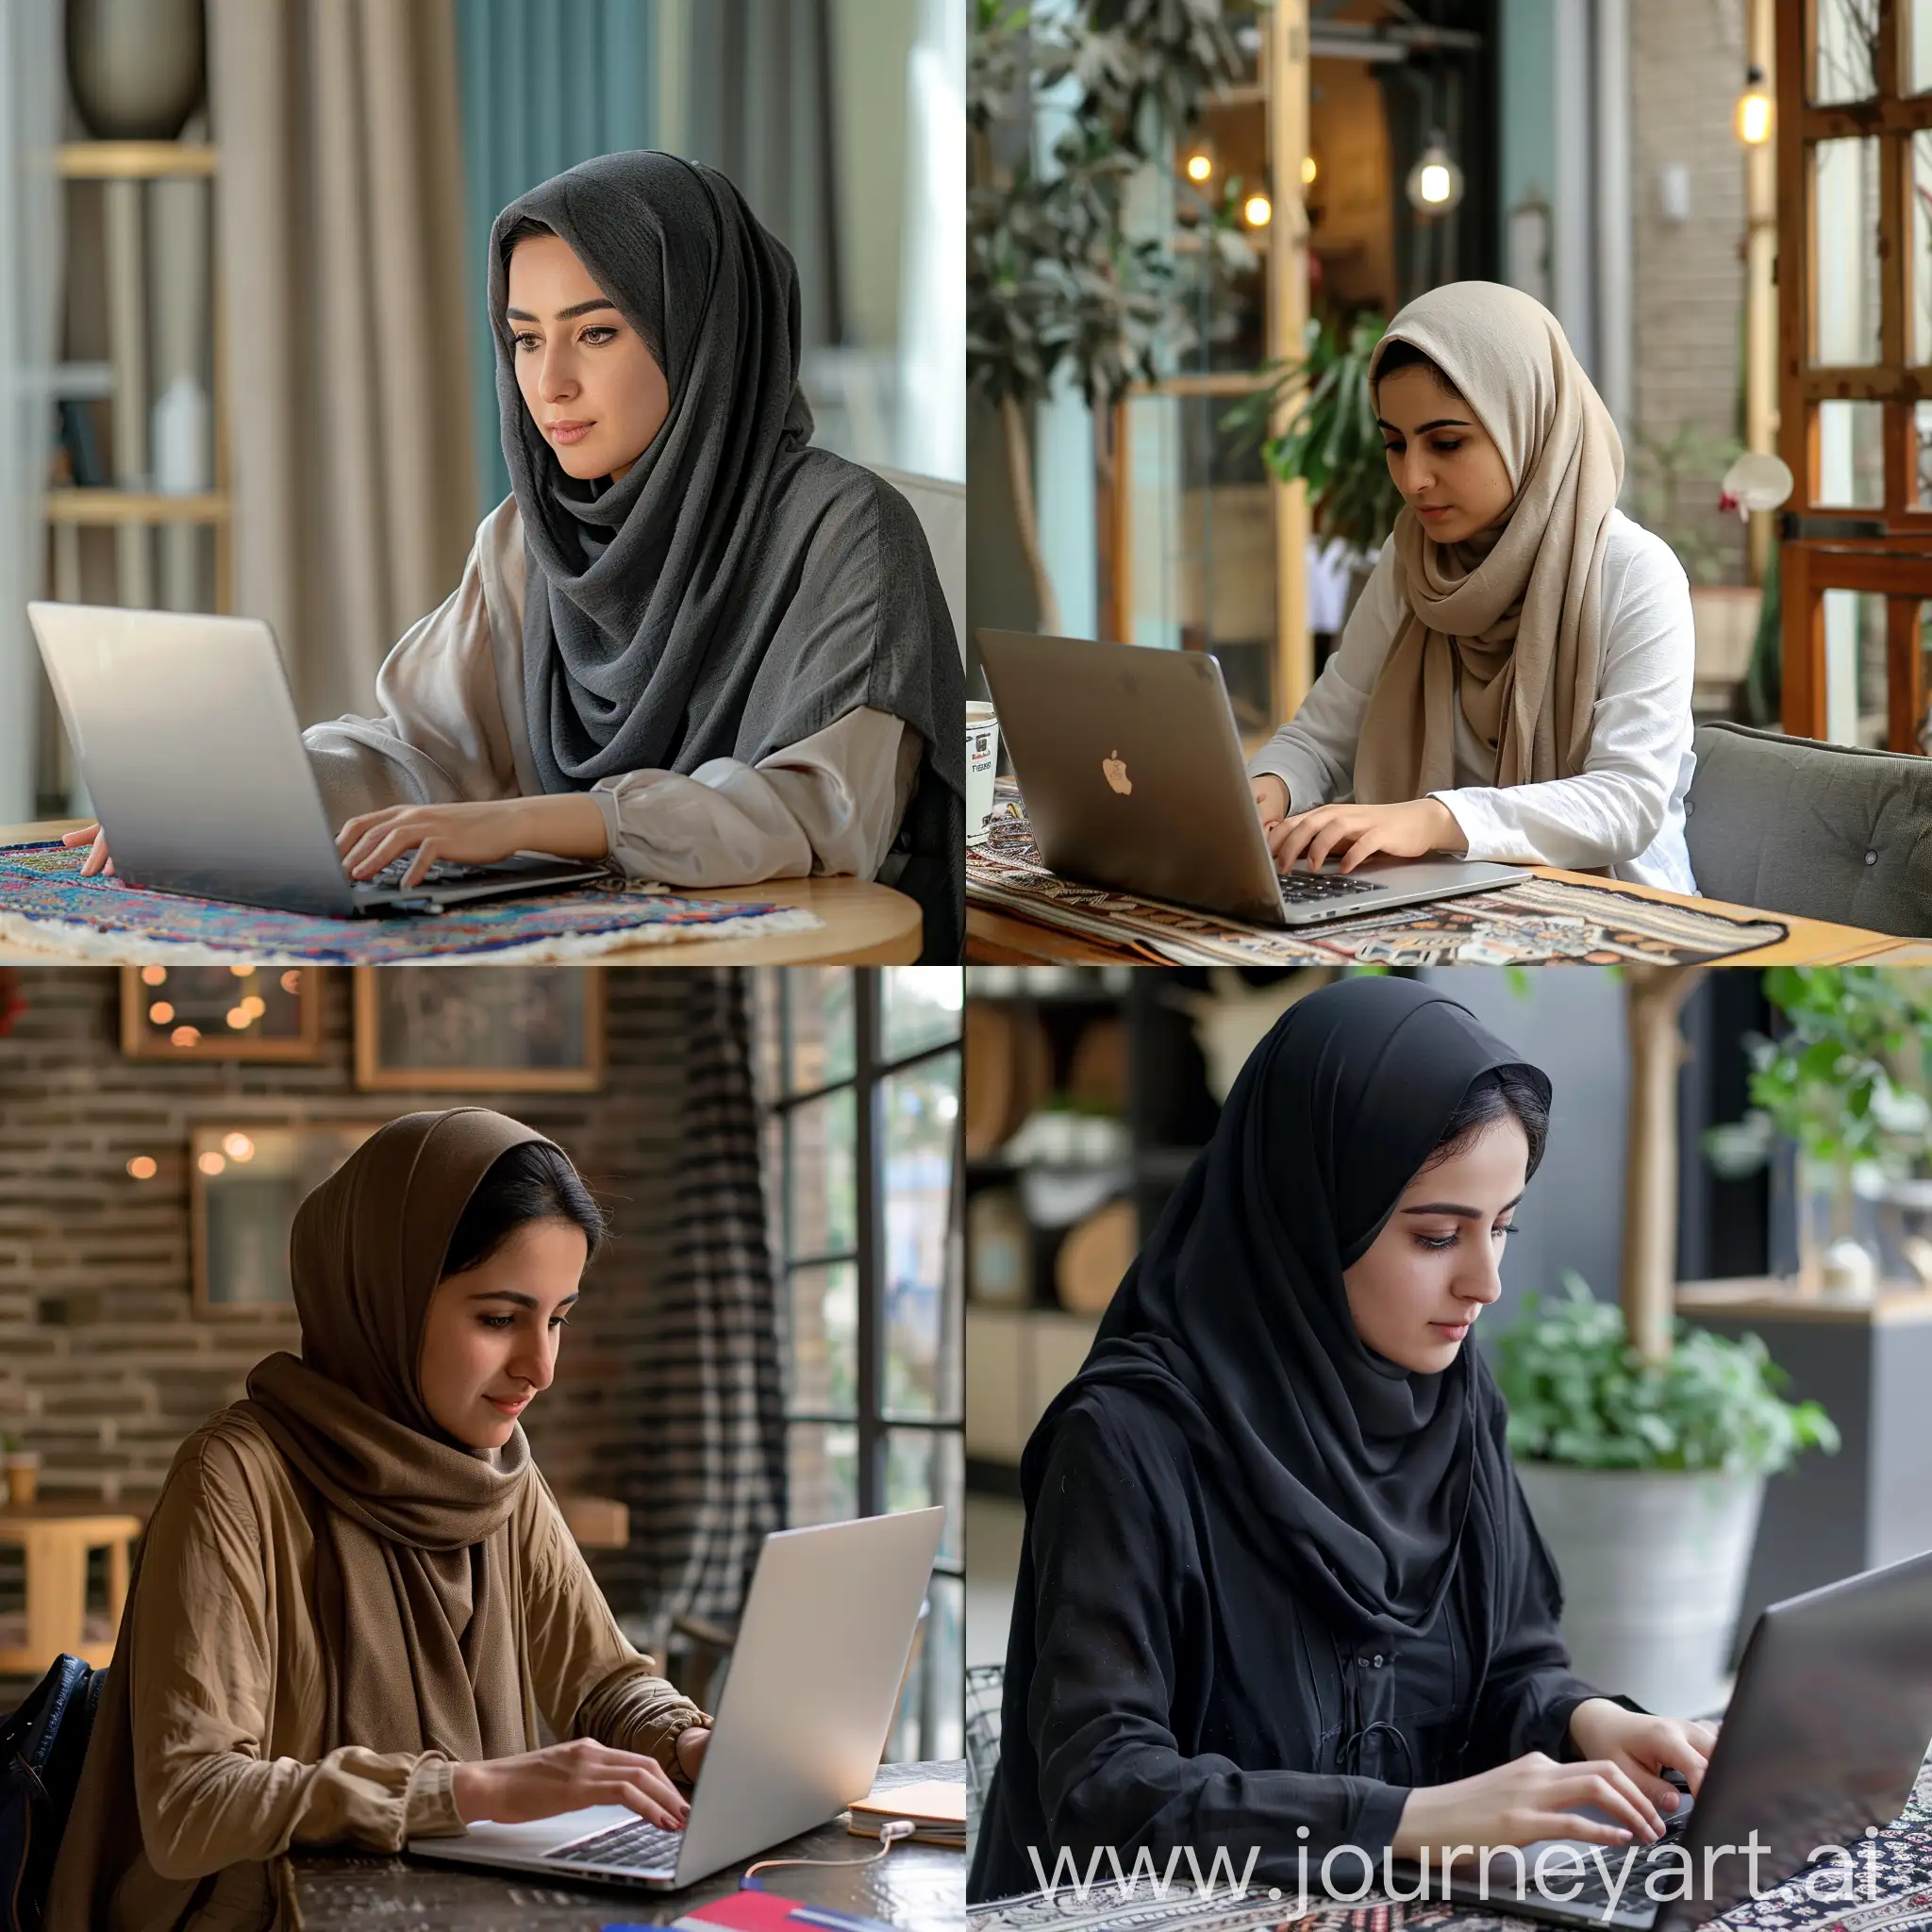 Young-Iranian-Woman-in-Hijab-Working-on-Laptop